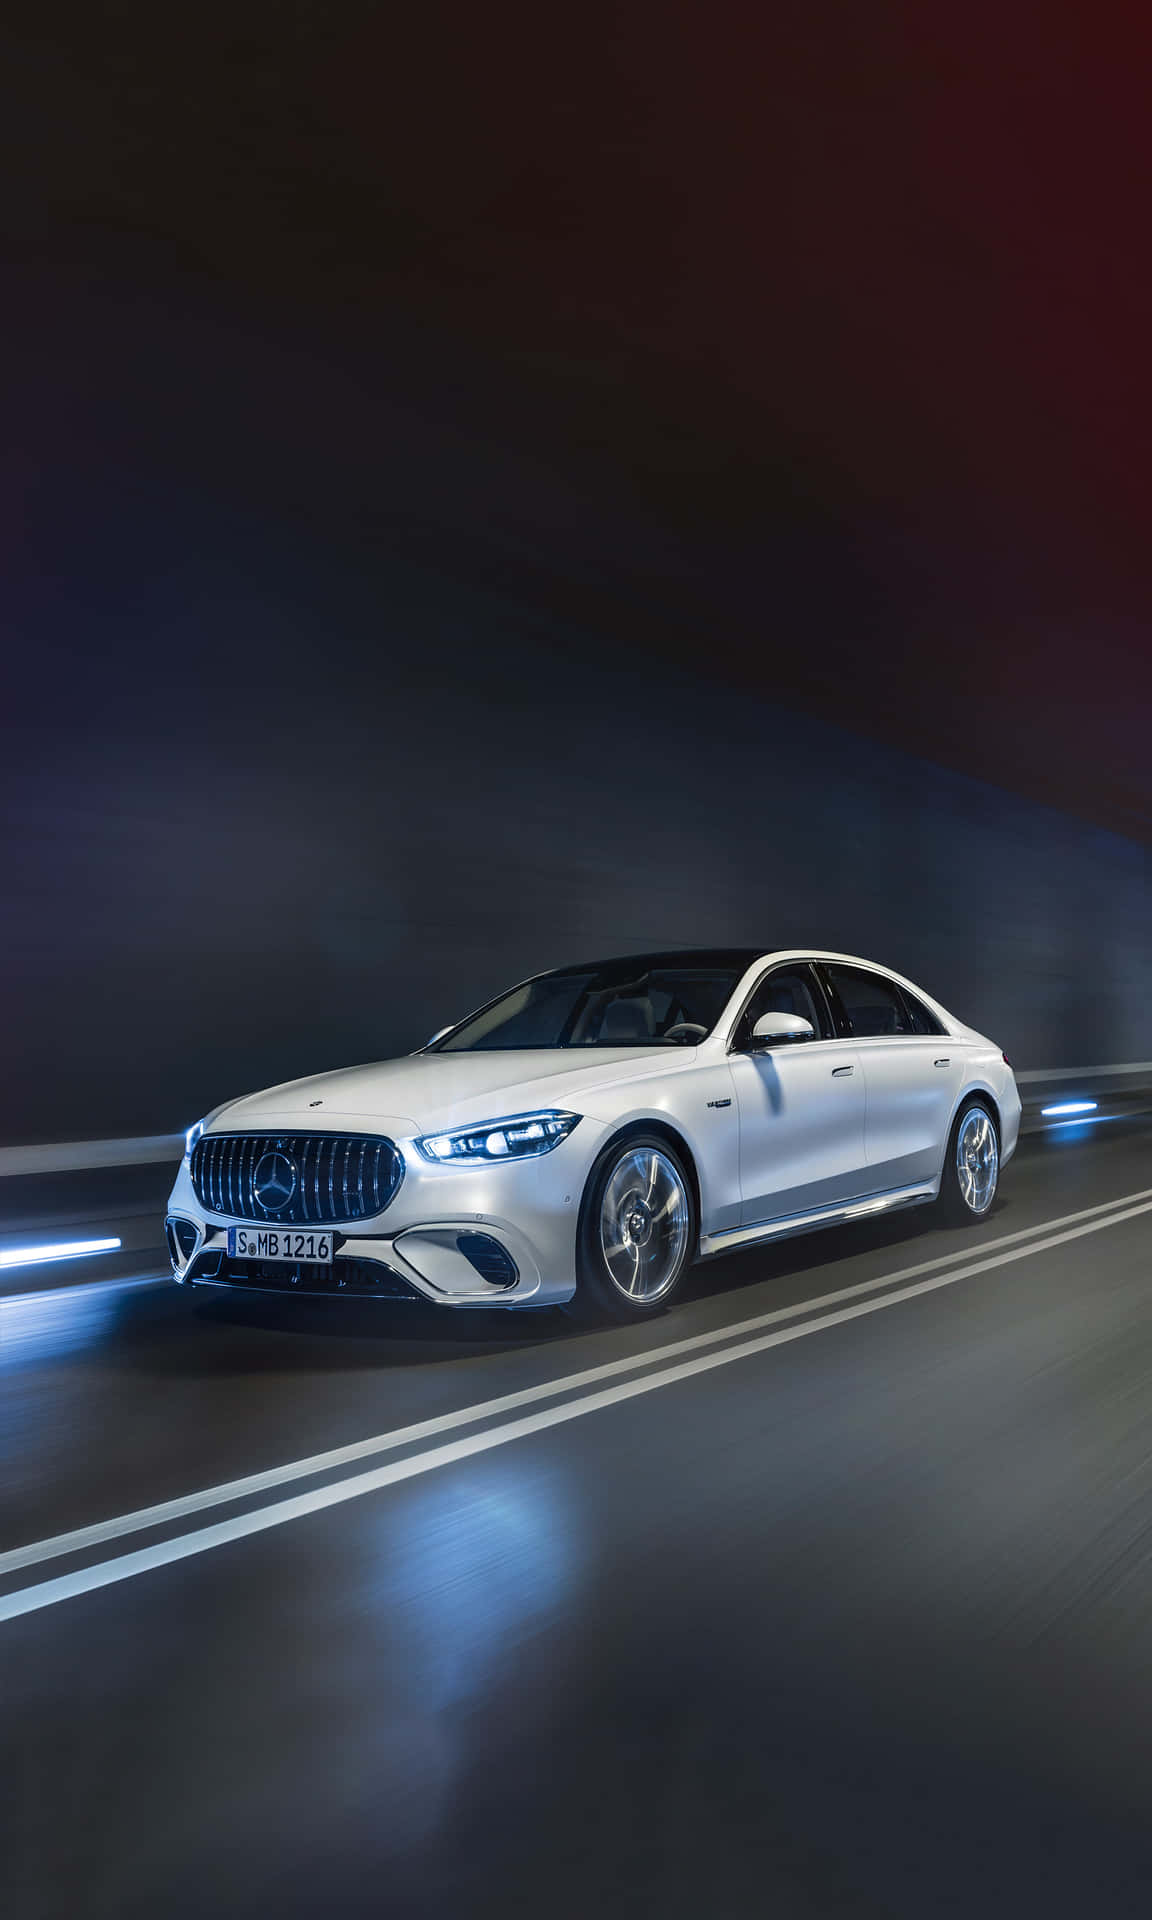 Get Connected with the Mercedes-Benz Phone Wallpaper